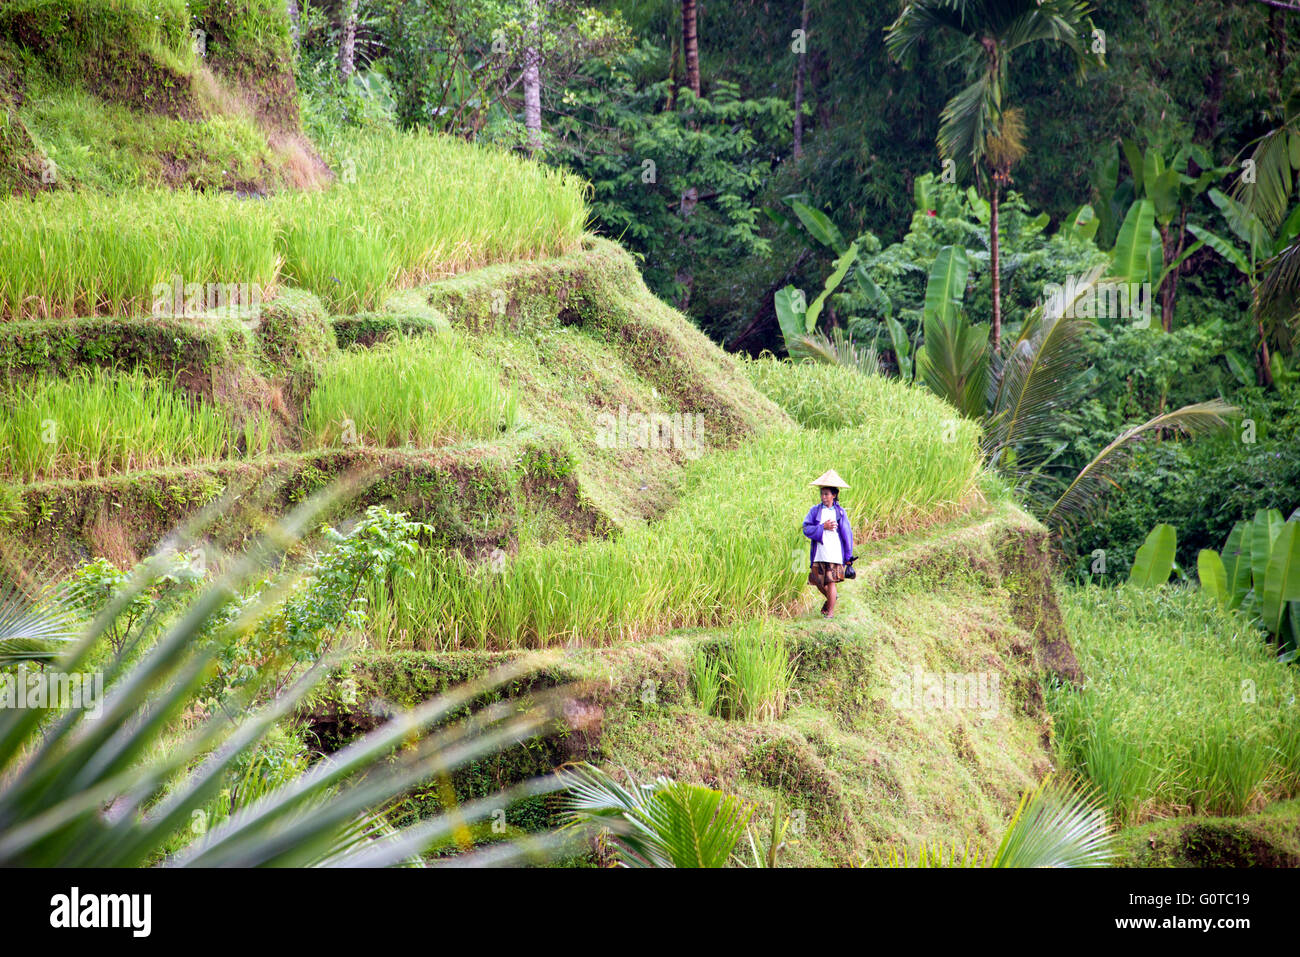 Balinese woman wearing conical hat Tegallalang rice terraces Ubud Bali Indonesia Stock Photo